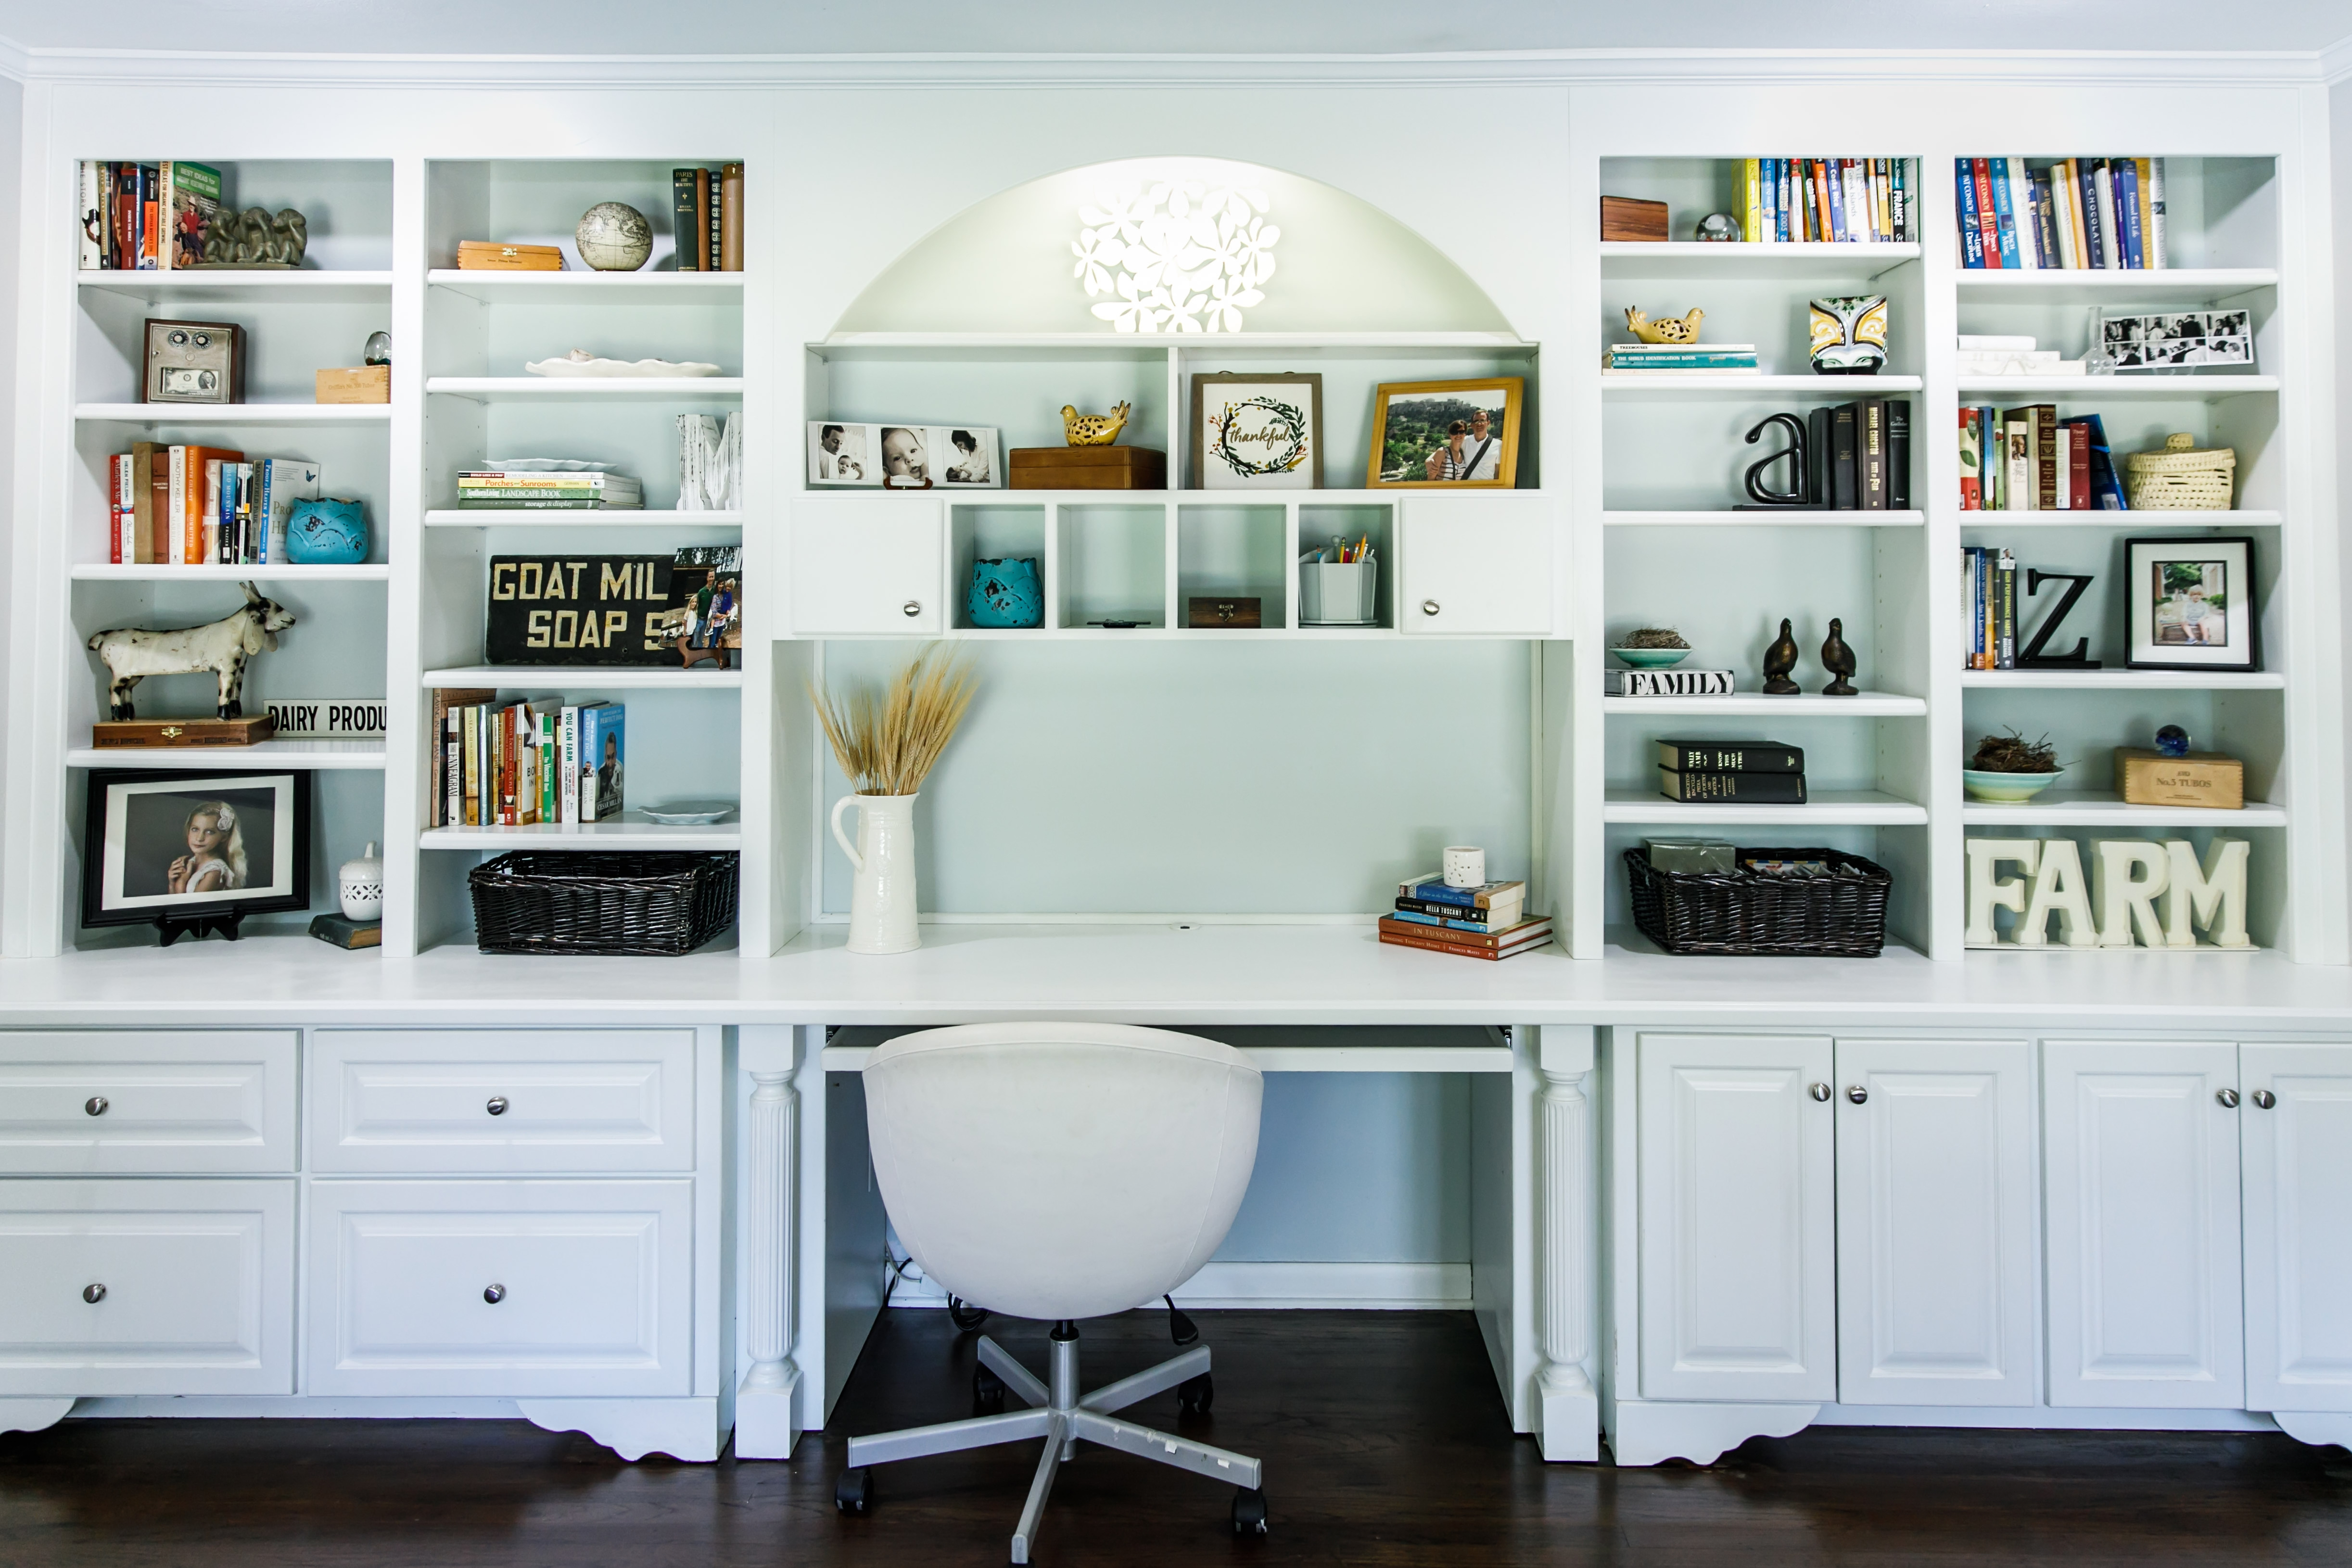 How to Design a Home Office, Based on Consumer Research | Residential ...